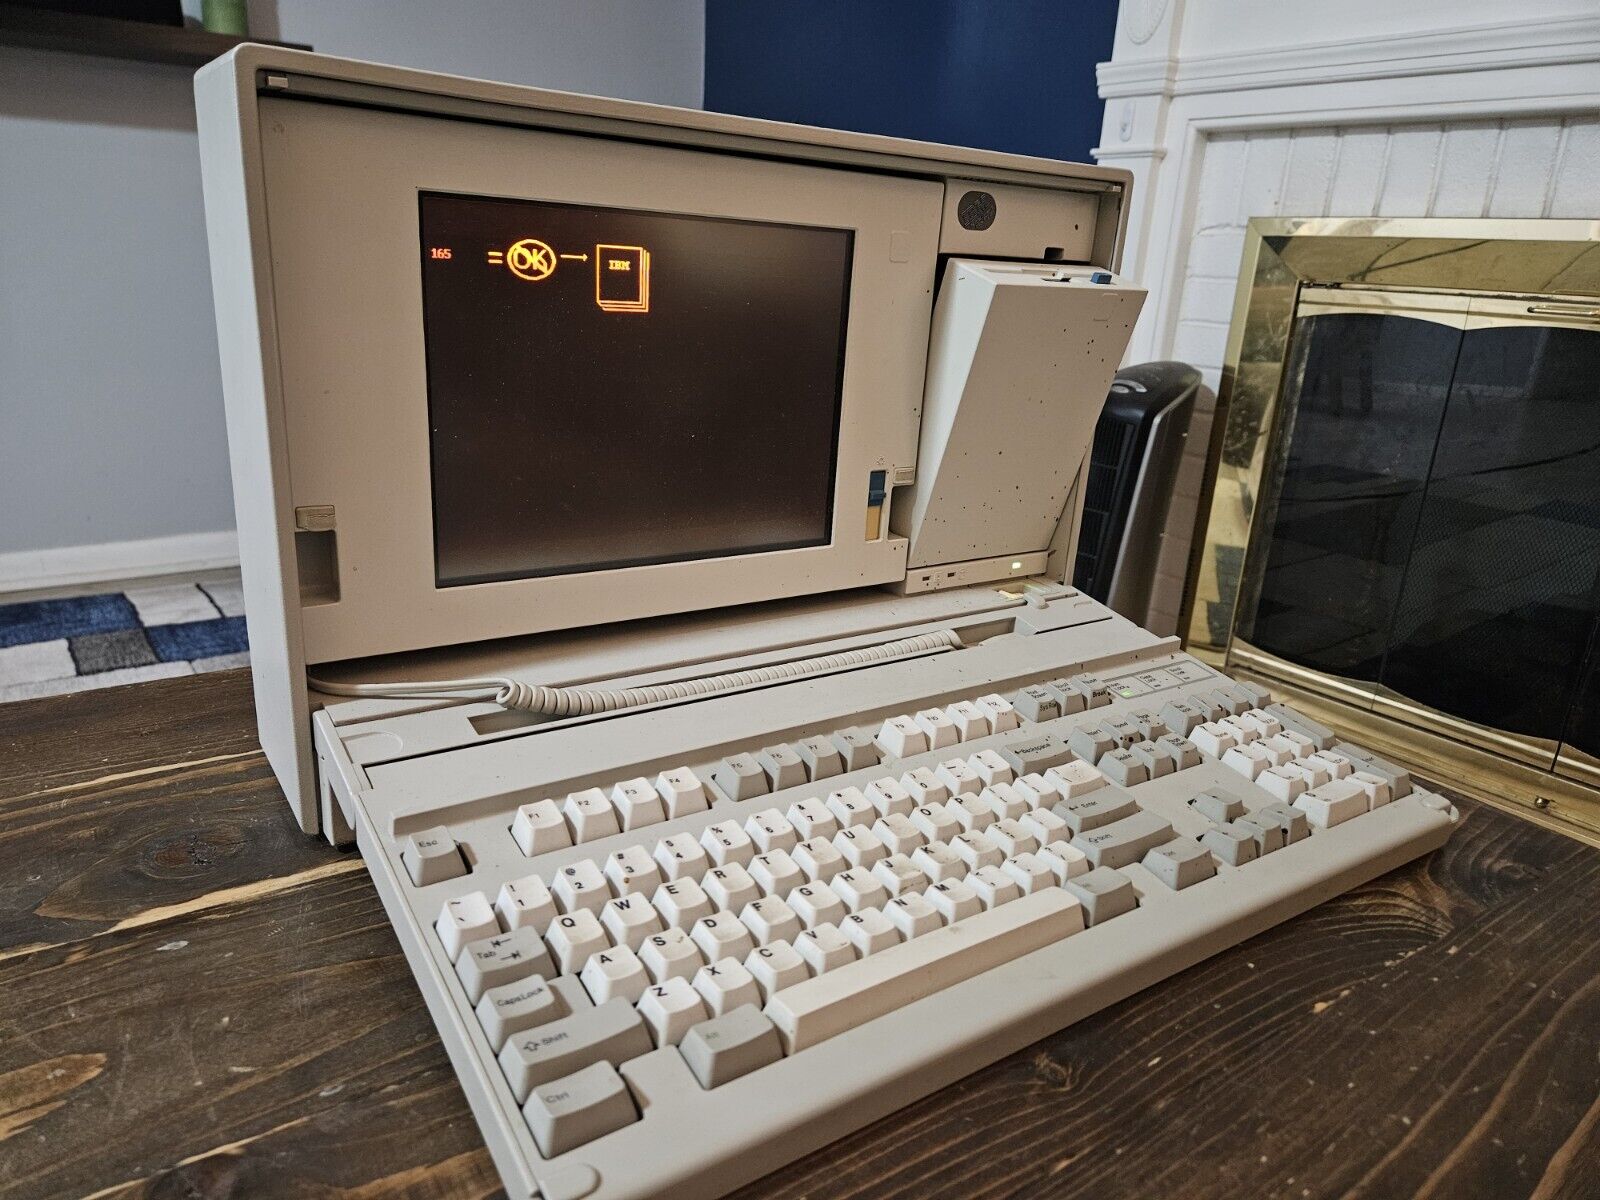 IBM Personal System/2 P70 386 Portable Computer - Type 8573-121 P/N 65X1580